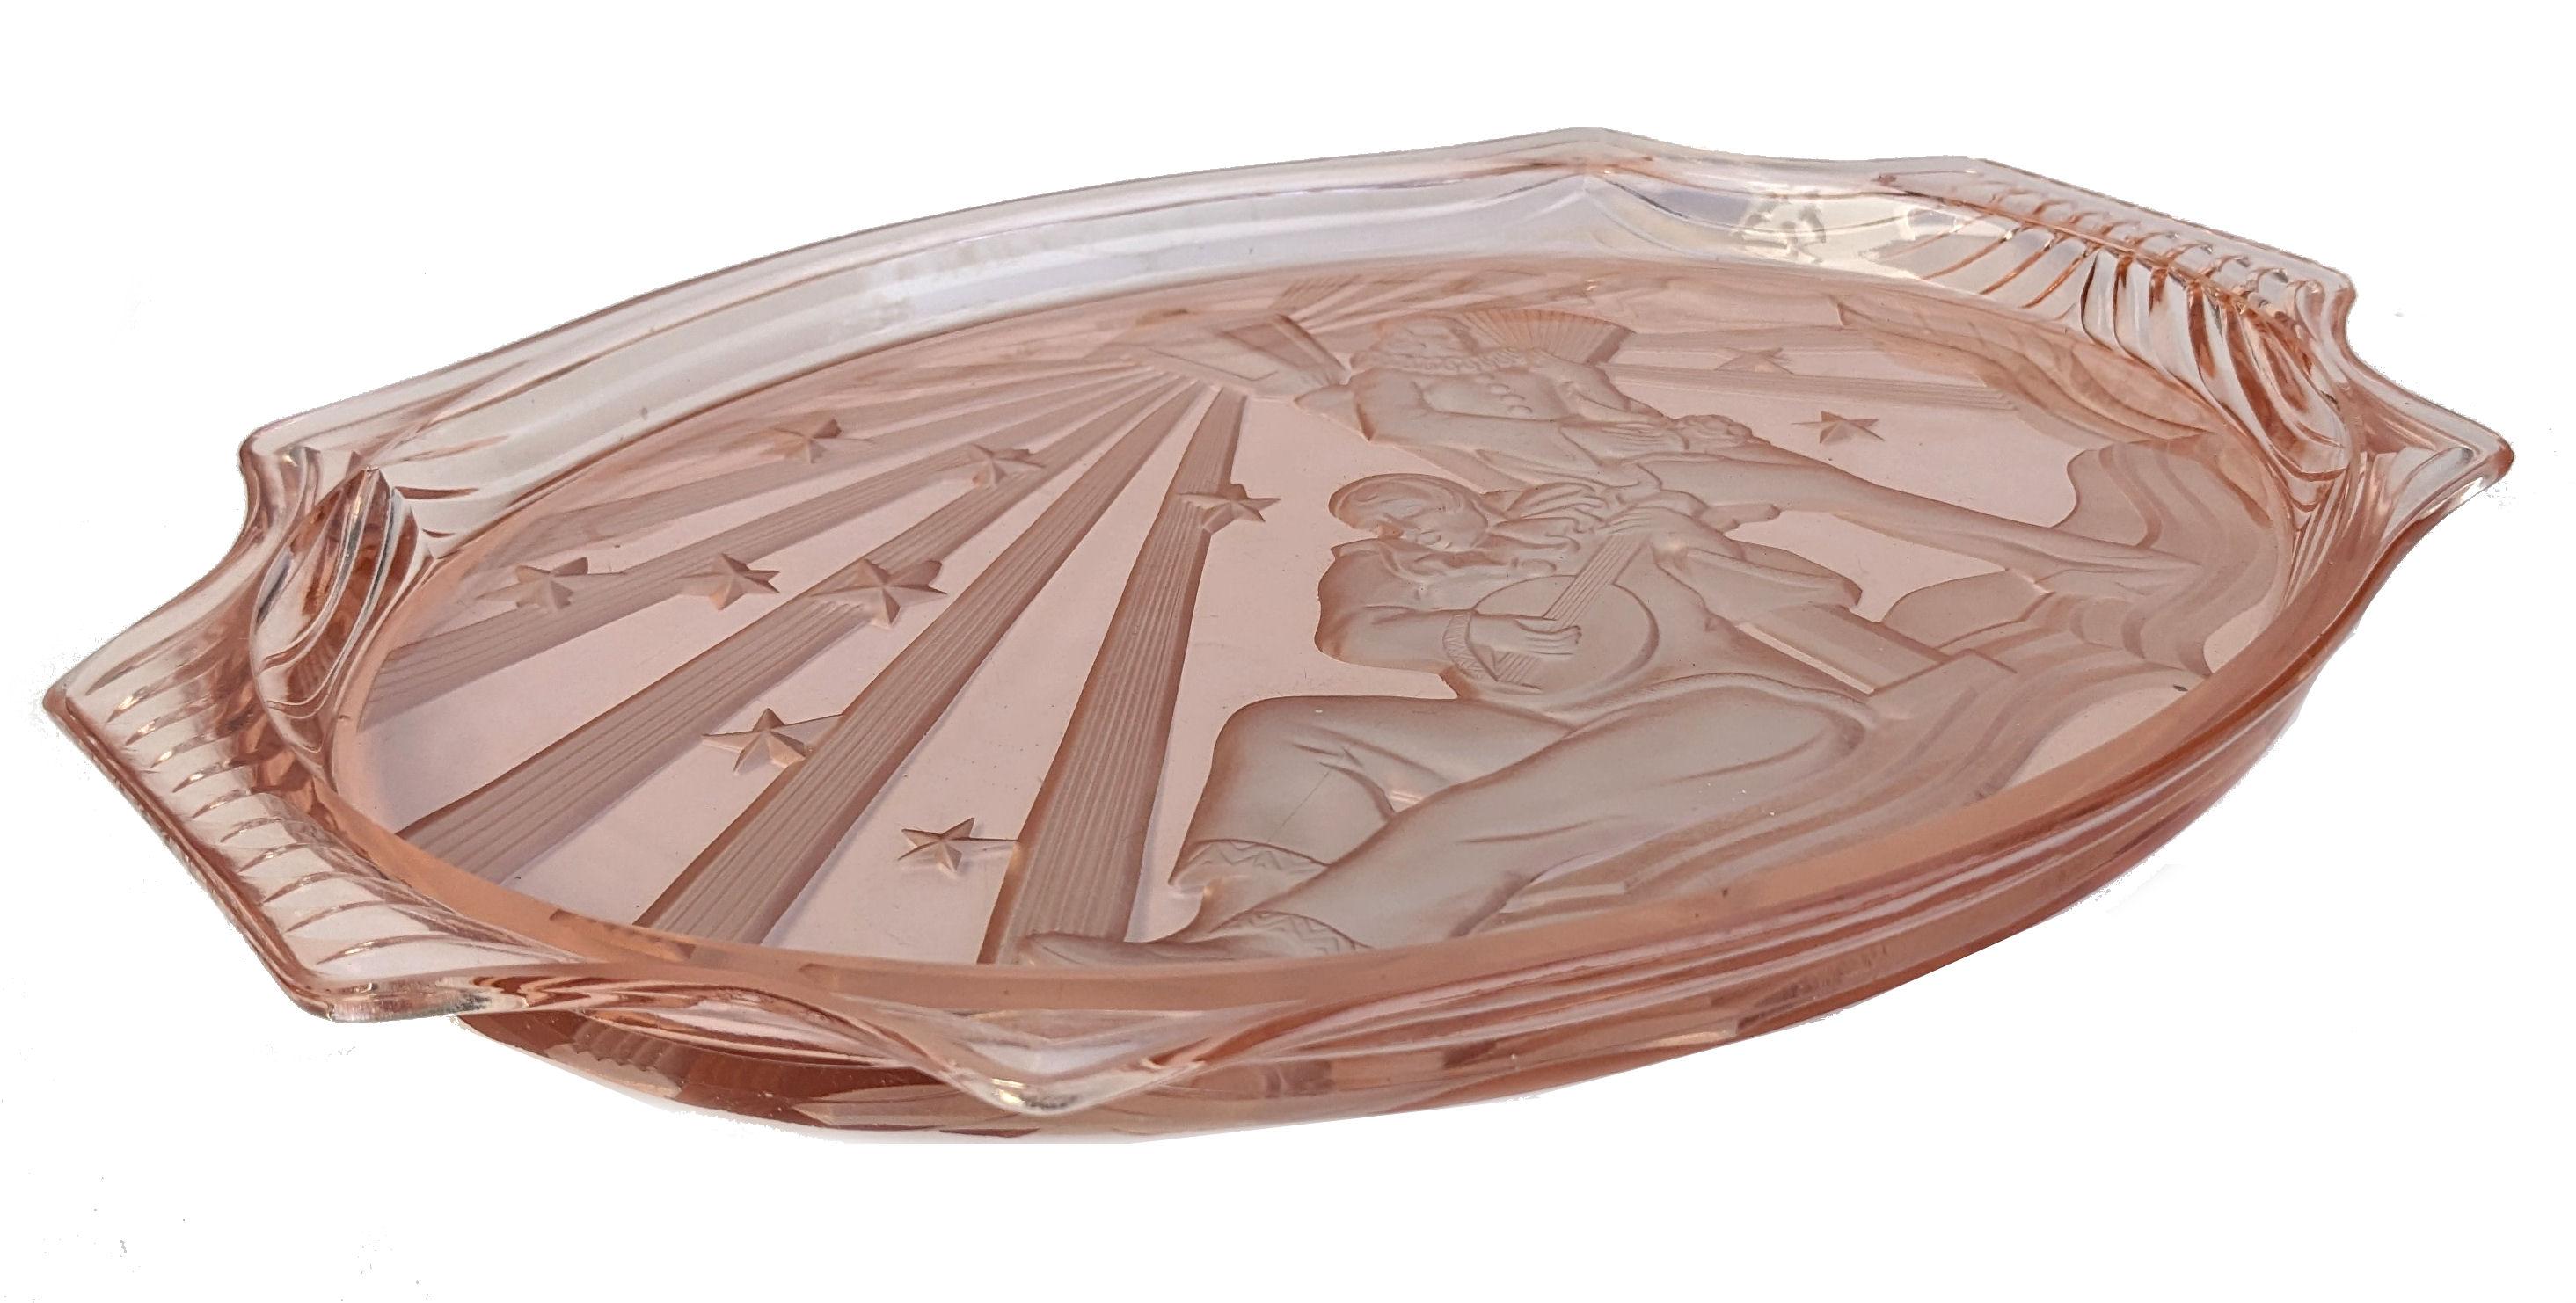 A wonderful large and heavy art deco frosted peach glass tray depicting a Pierrot & Pierrette for a dressing table / trinket set. Made by German company Auguste Walther & Söhne in the 1930's and is featured in their 1934 product catalogue.
Perfect